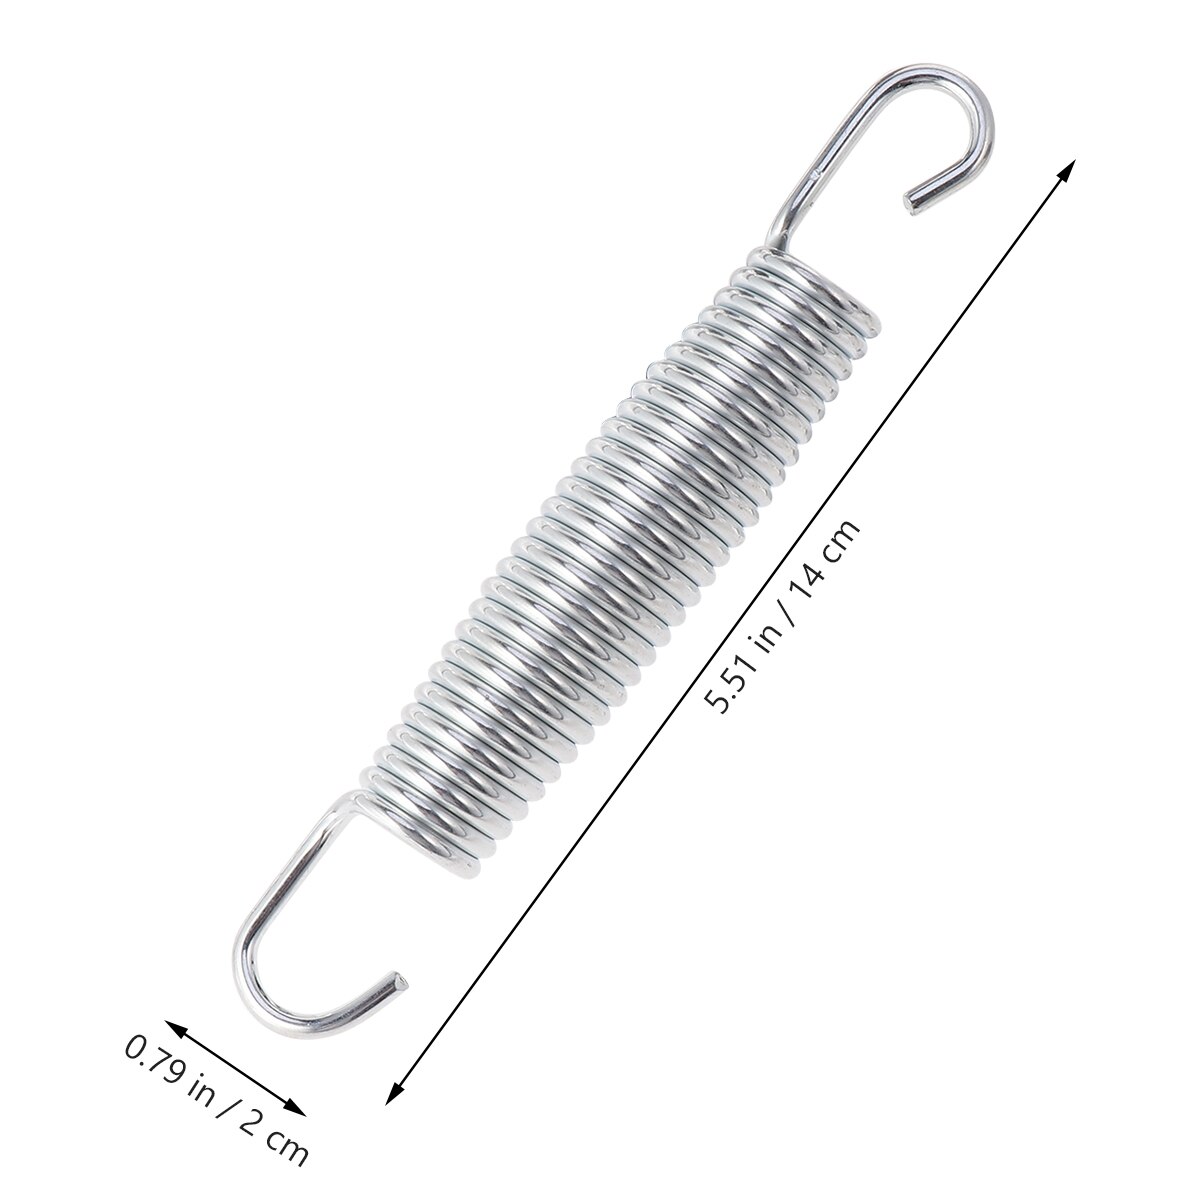 20PCS Trampoline Springs Stainless Steel Tension Spring Versatile Double Hook Spring Sturdy Extension Spring for Home Store Use